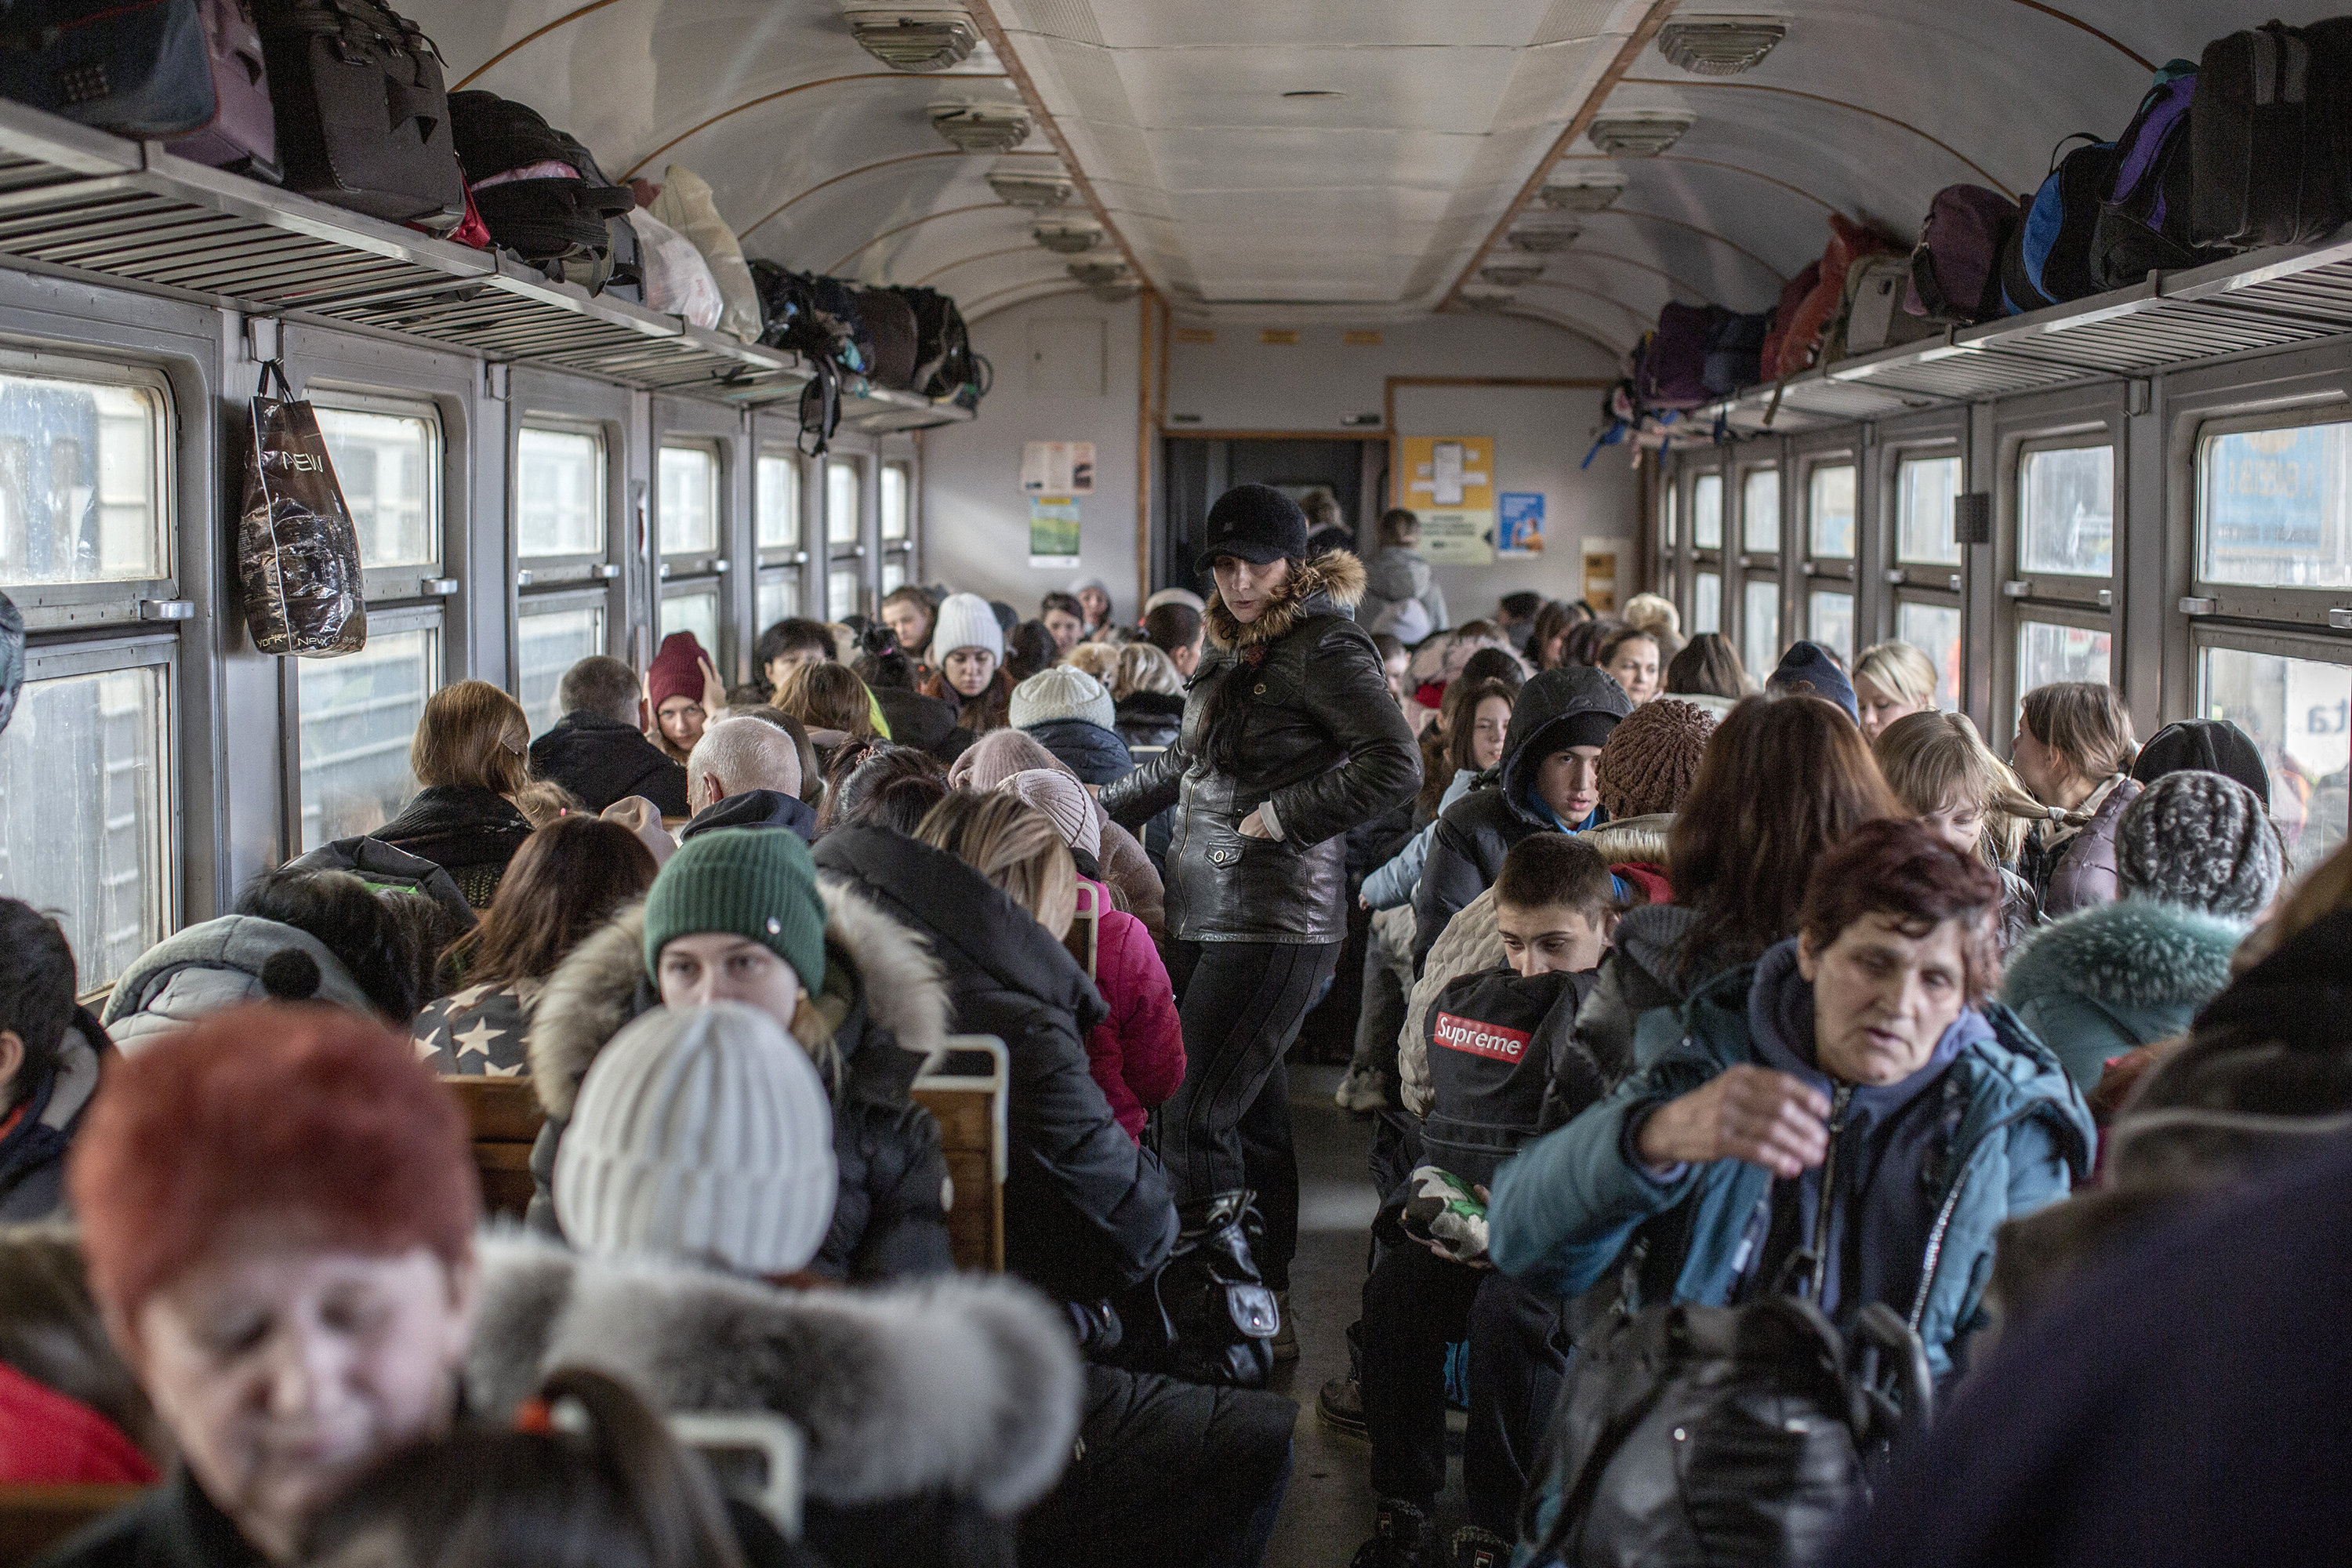 Displaced Ukrainians wait in the train station as they flee from the war in Lviv, Ukraine on March 15. 